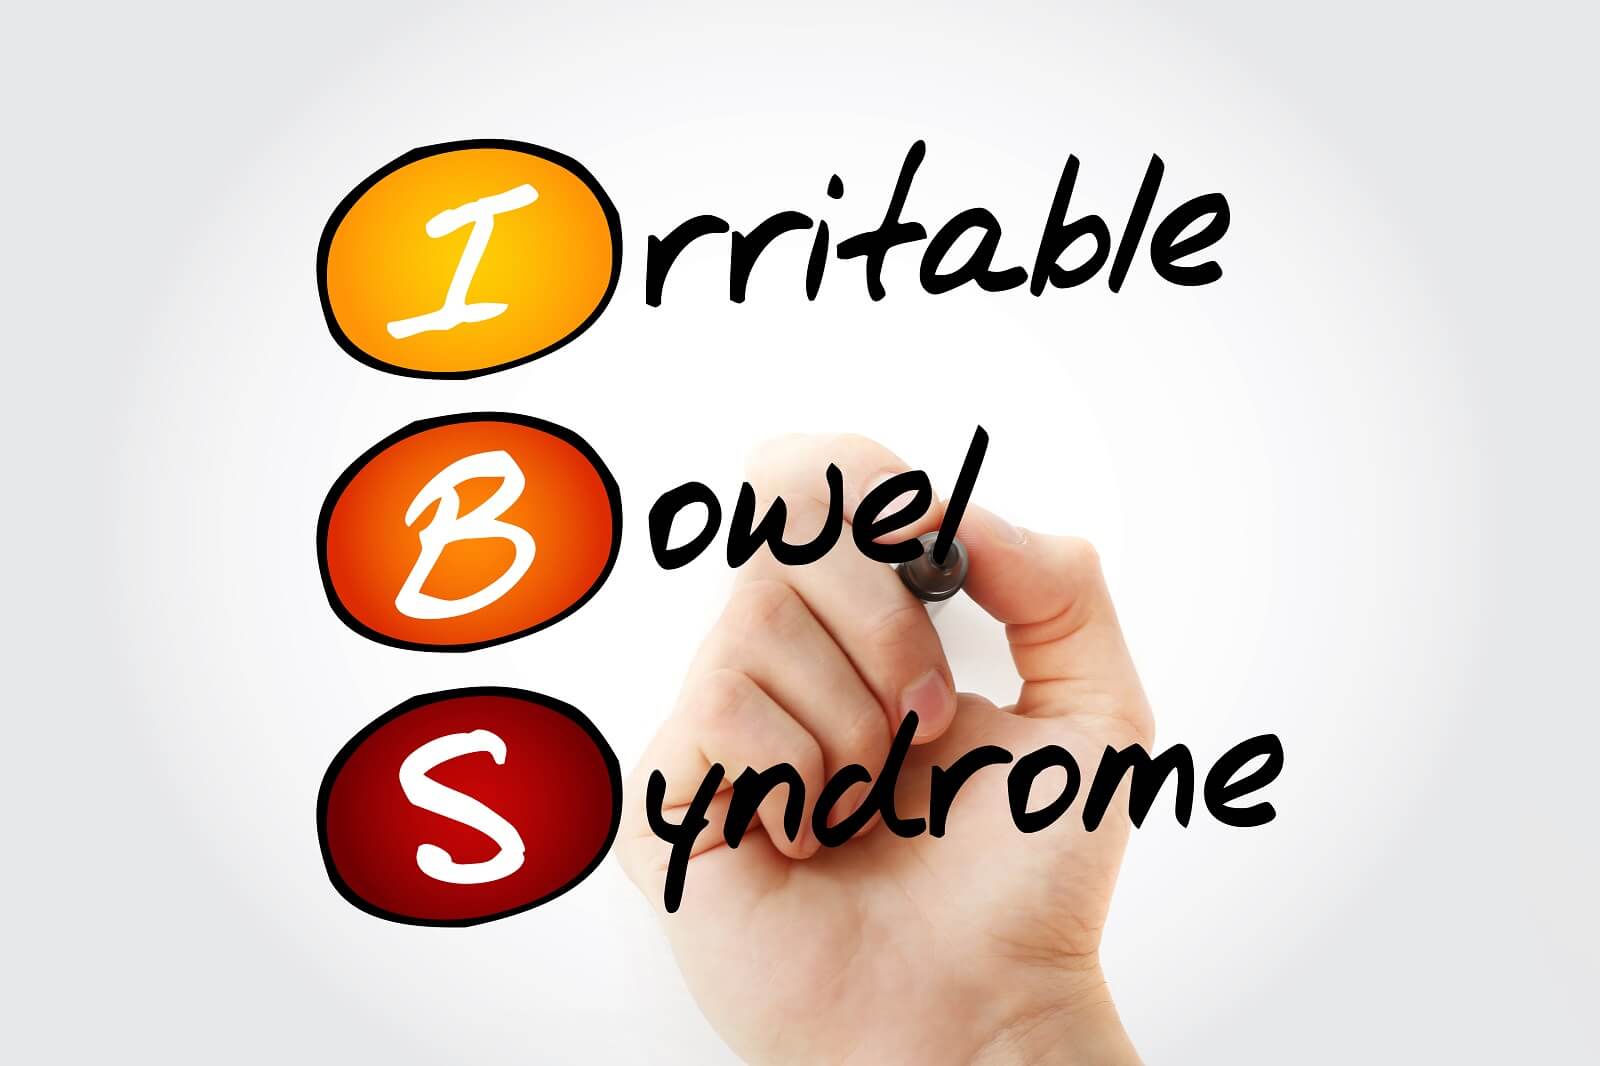 Irritable bowel syndrome abbreviation in colorful letters.